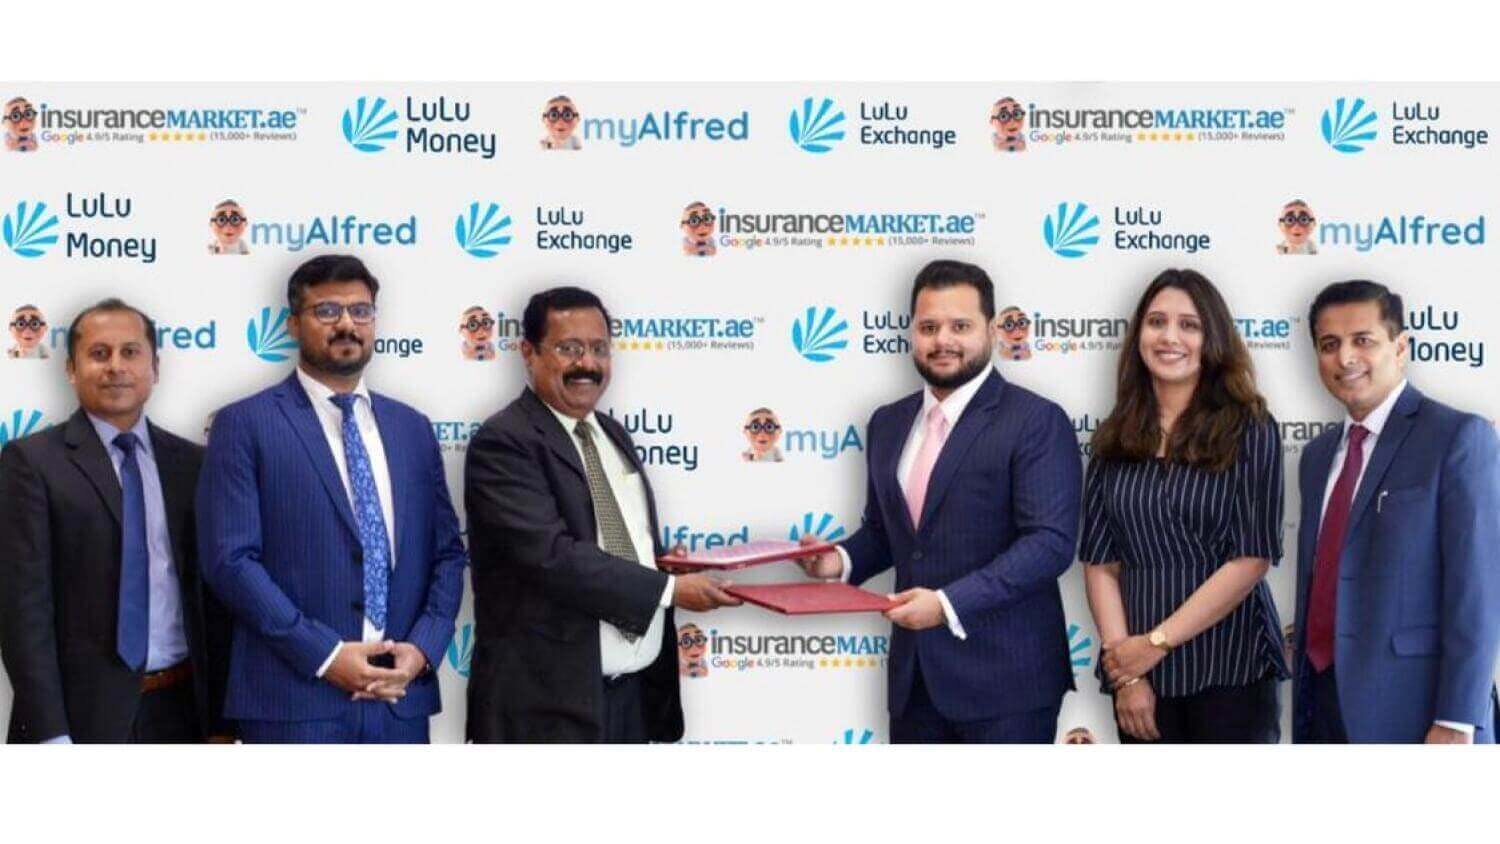 InsuranceMarket.ae and Lulu Exchange announce a 'pearl' of a partnership